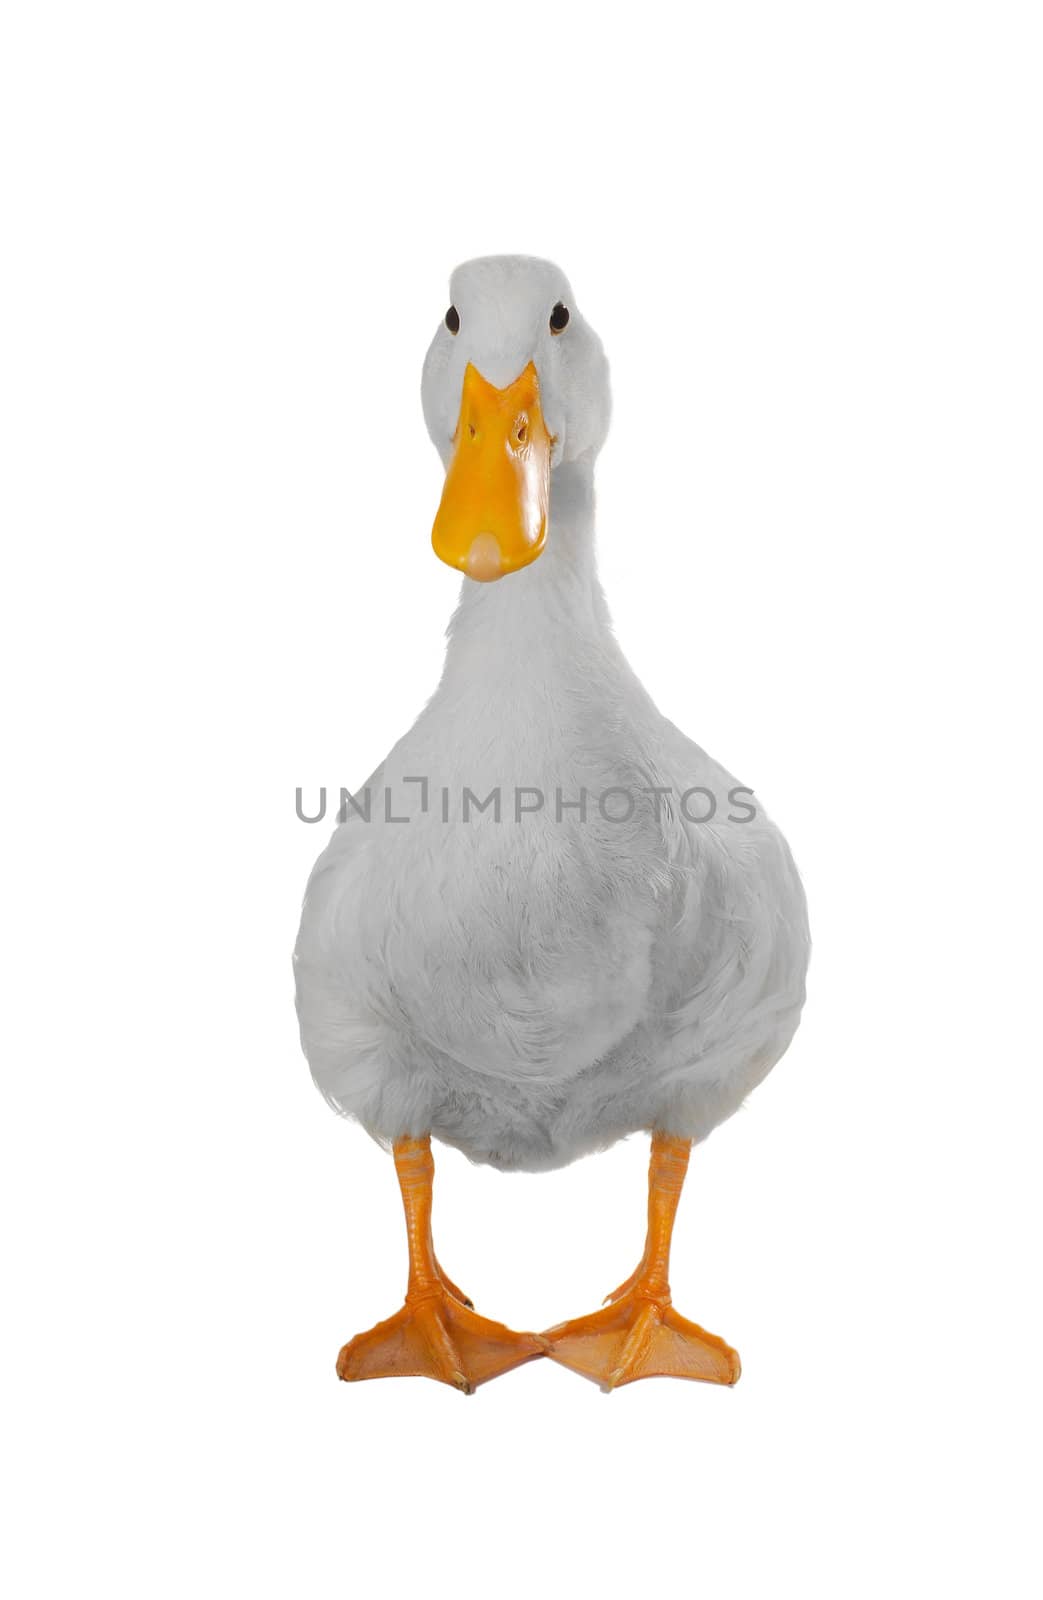  duck white on white a background           